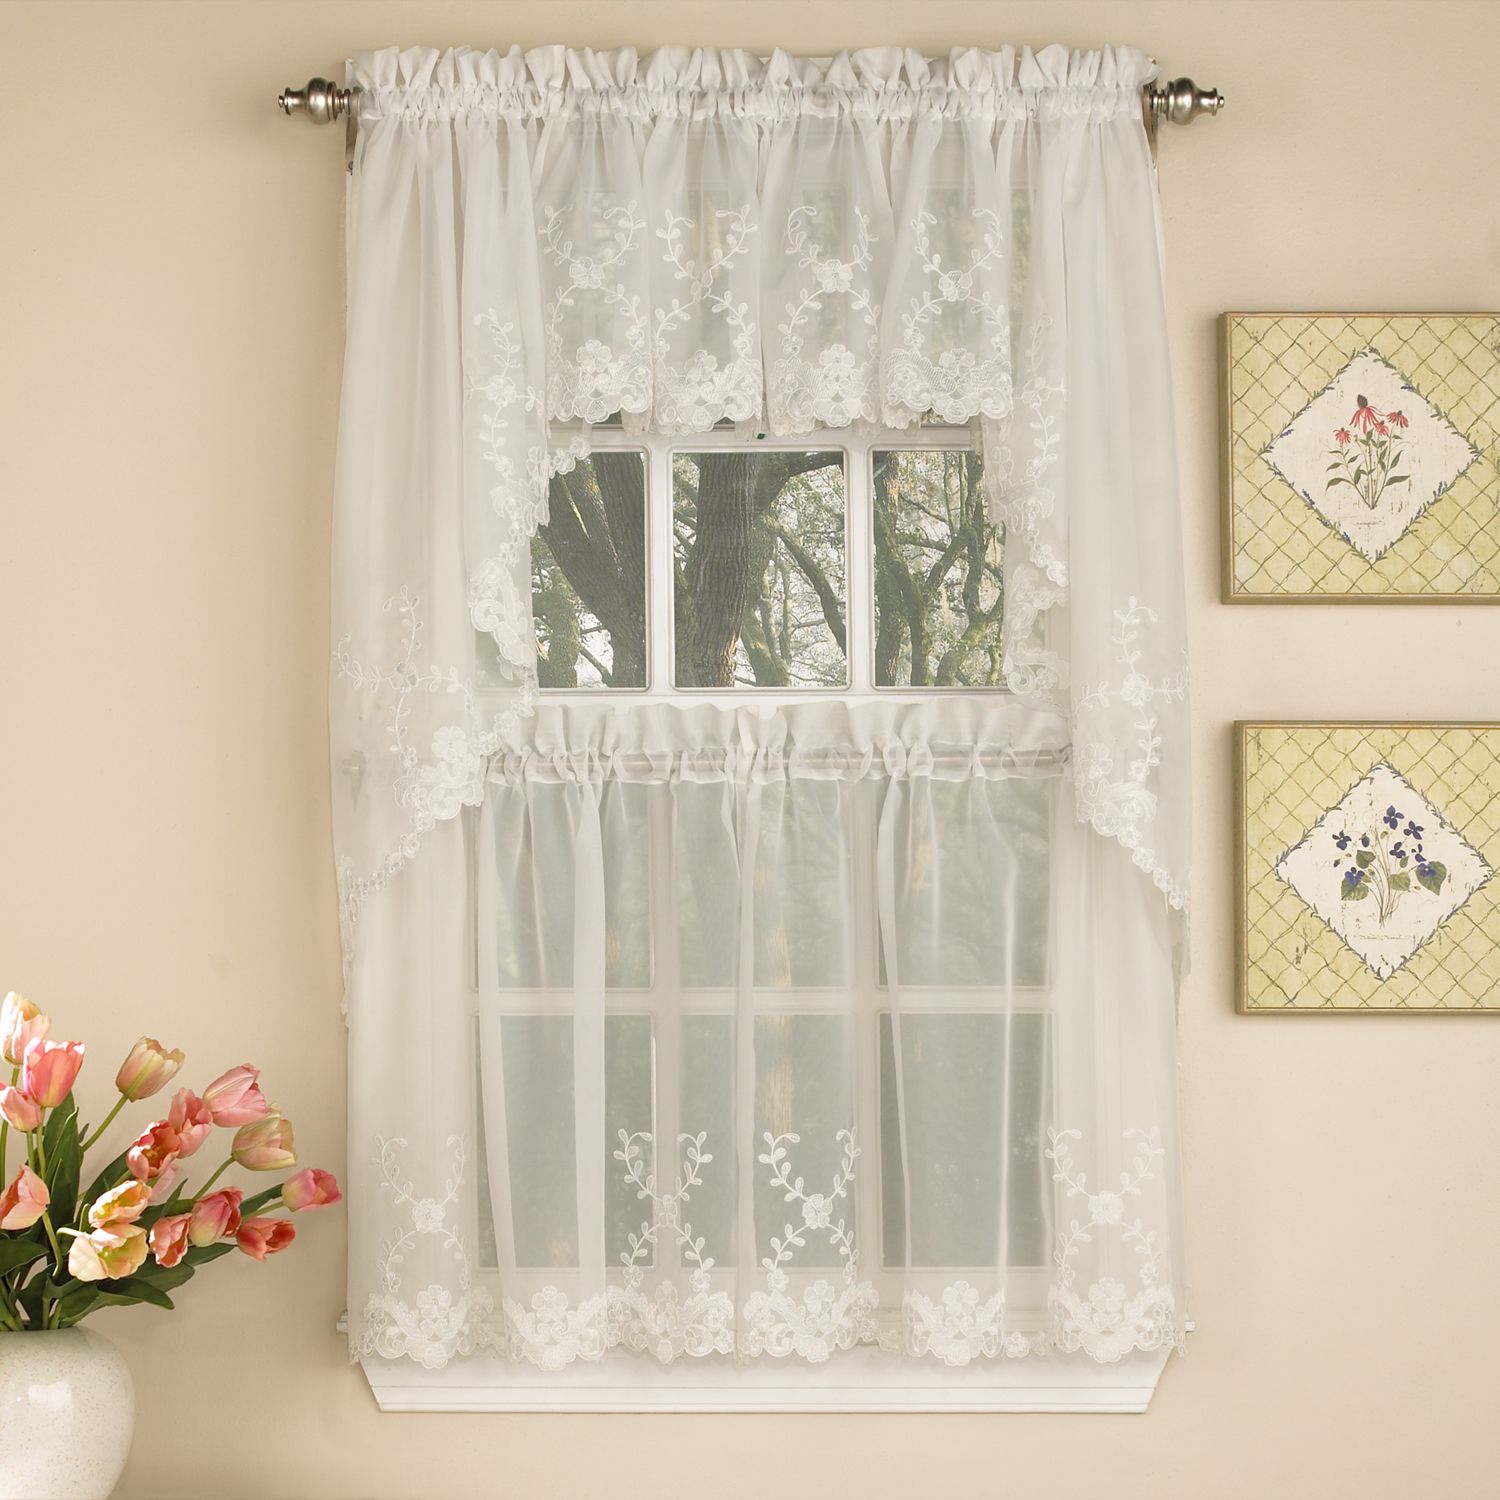 Most Recently Released Kitchen Curtain Tiers Pertaining To Details About Laurel Leaf Sheer Voile Embroidered Ivory Kitchen Curtains  Tier, Valance Or Swag (View 2 of 20)